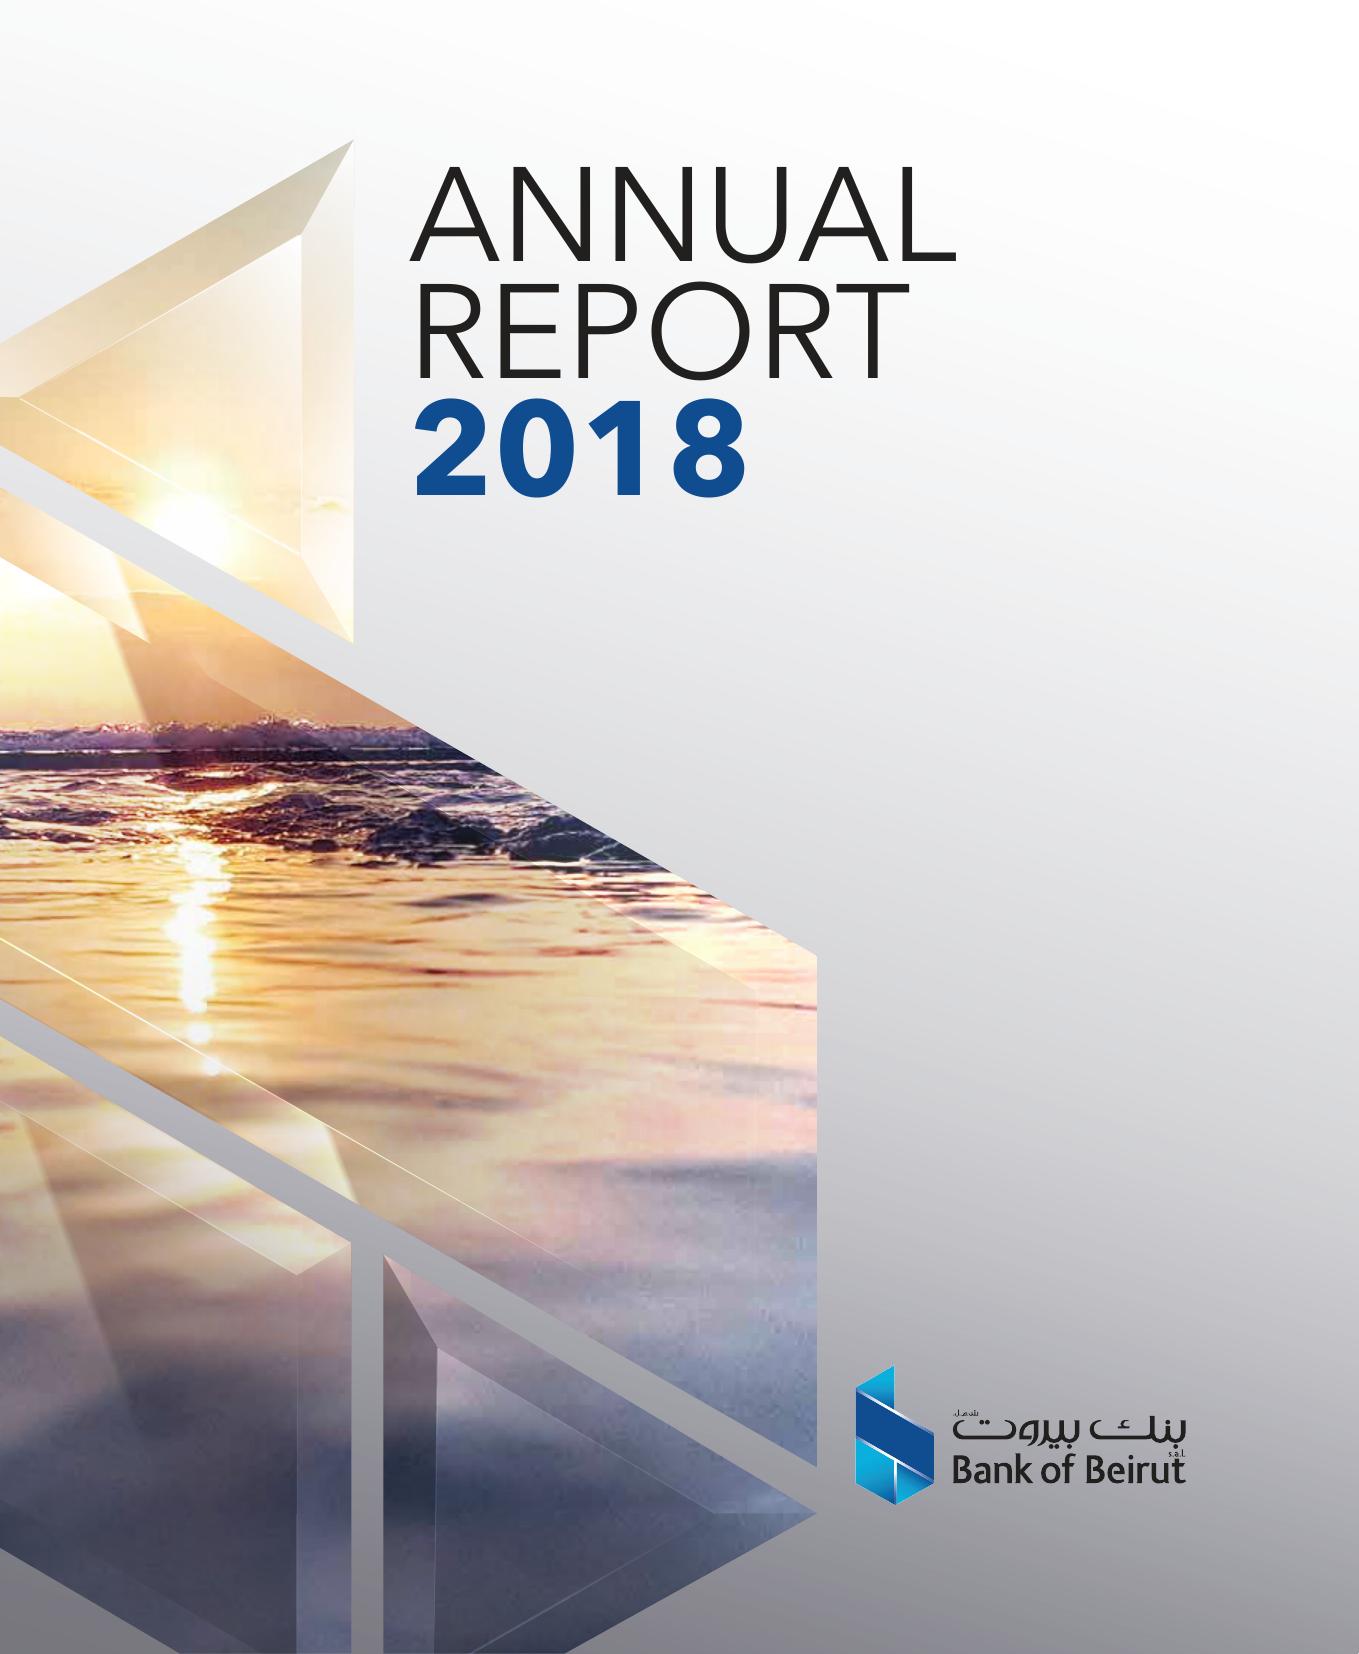 BANKOFBEIRUT Annual Report